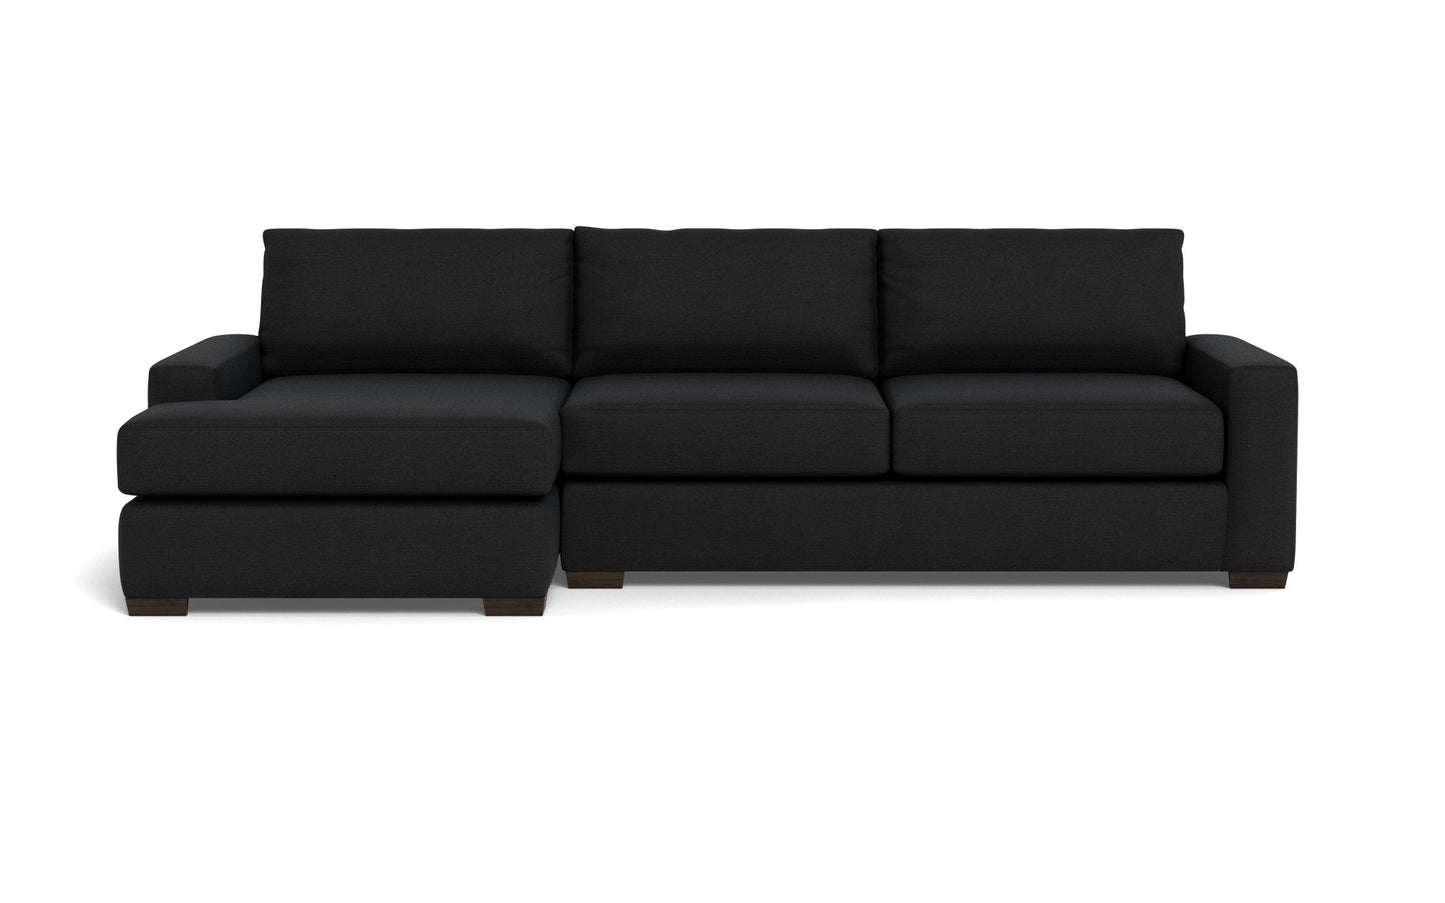 Mas Mesa Left Chaise Sectional